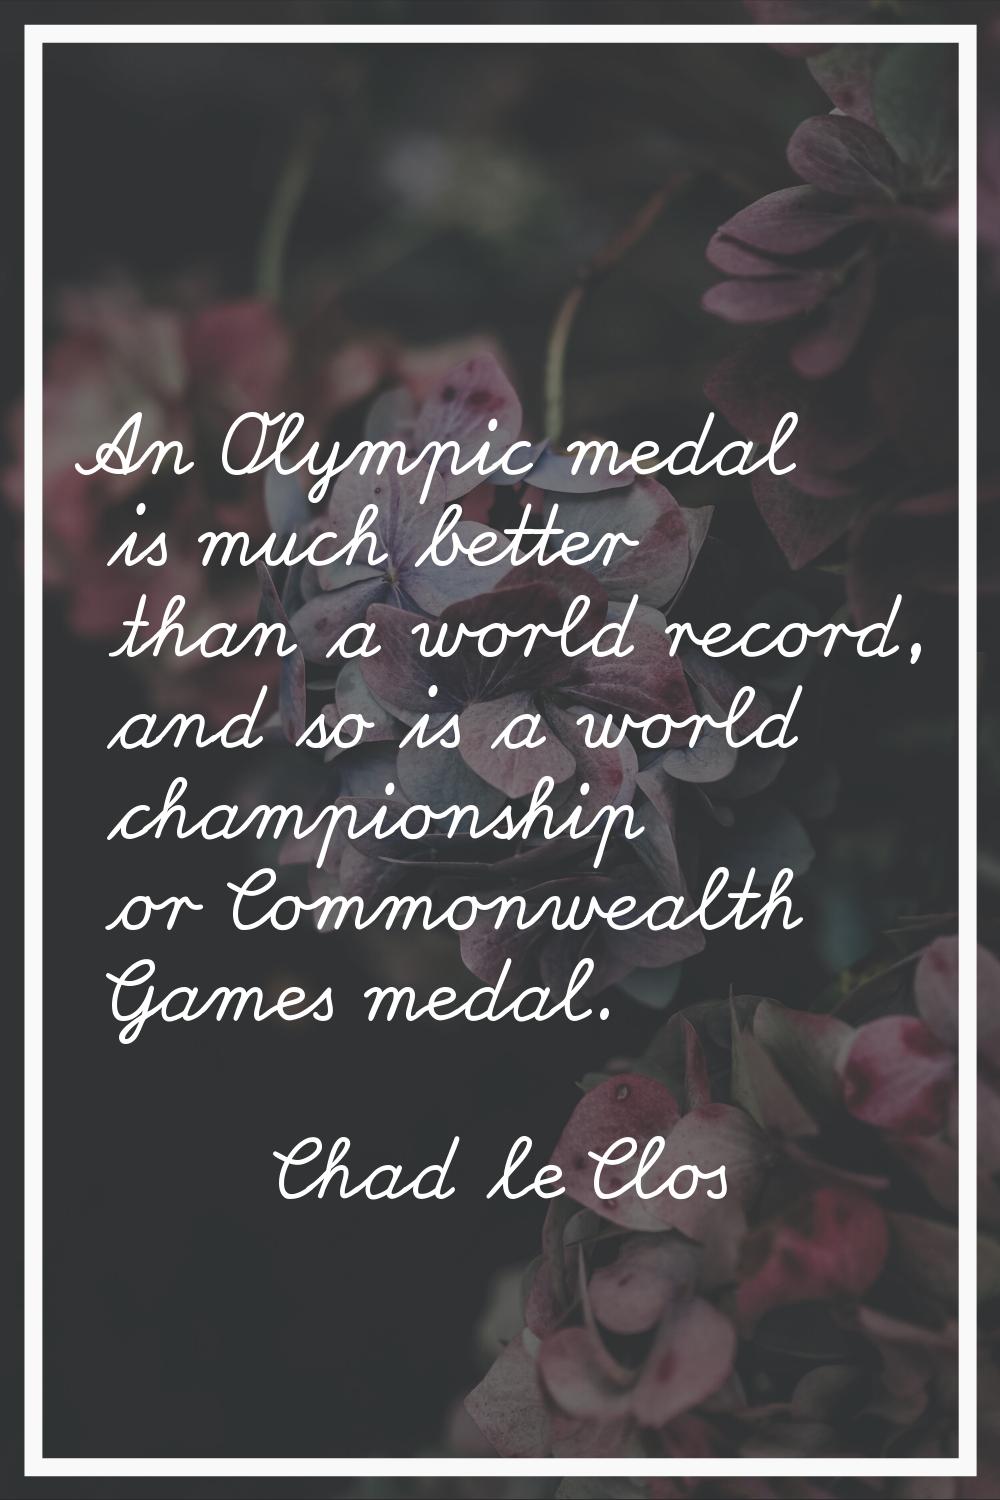 An Olympic medal is much better than a world record, and so is a world championship or Commonwealth